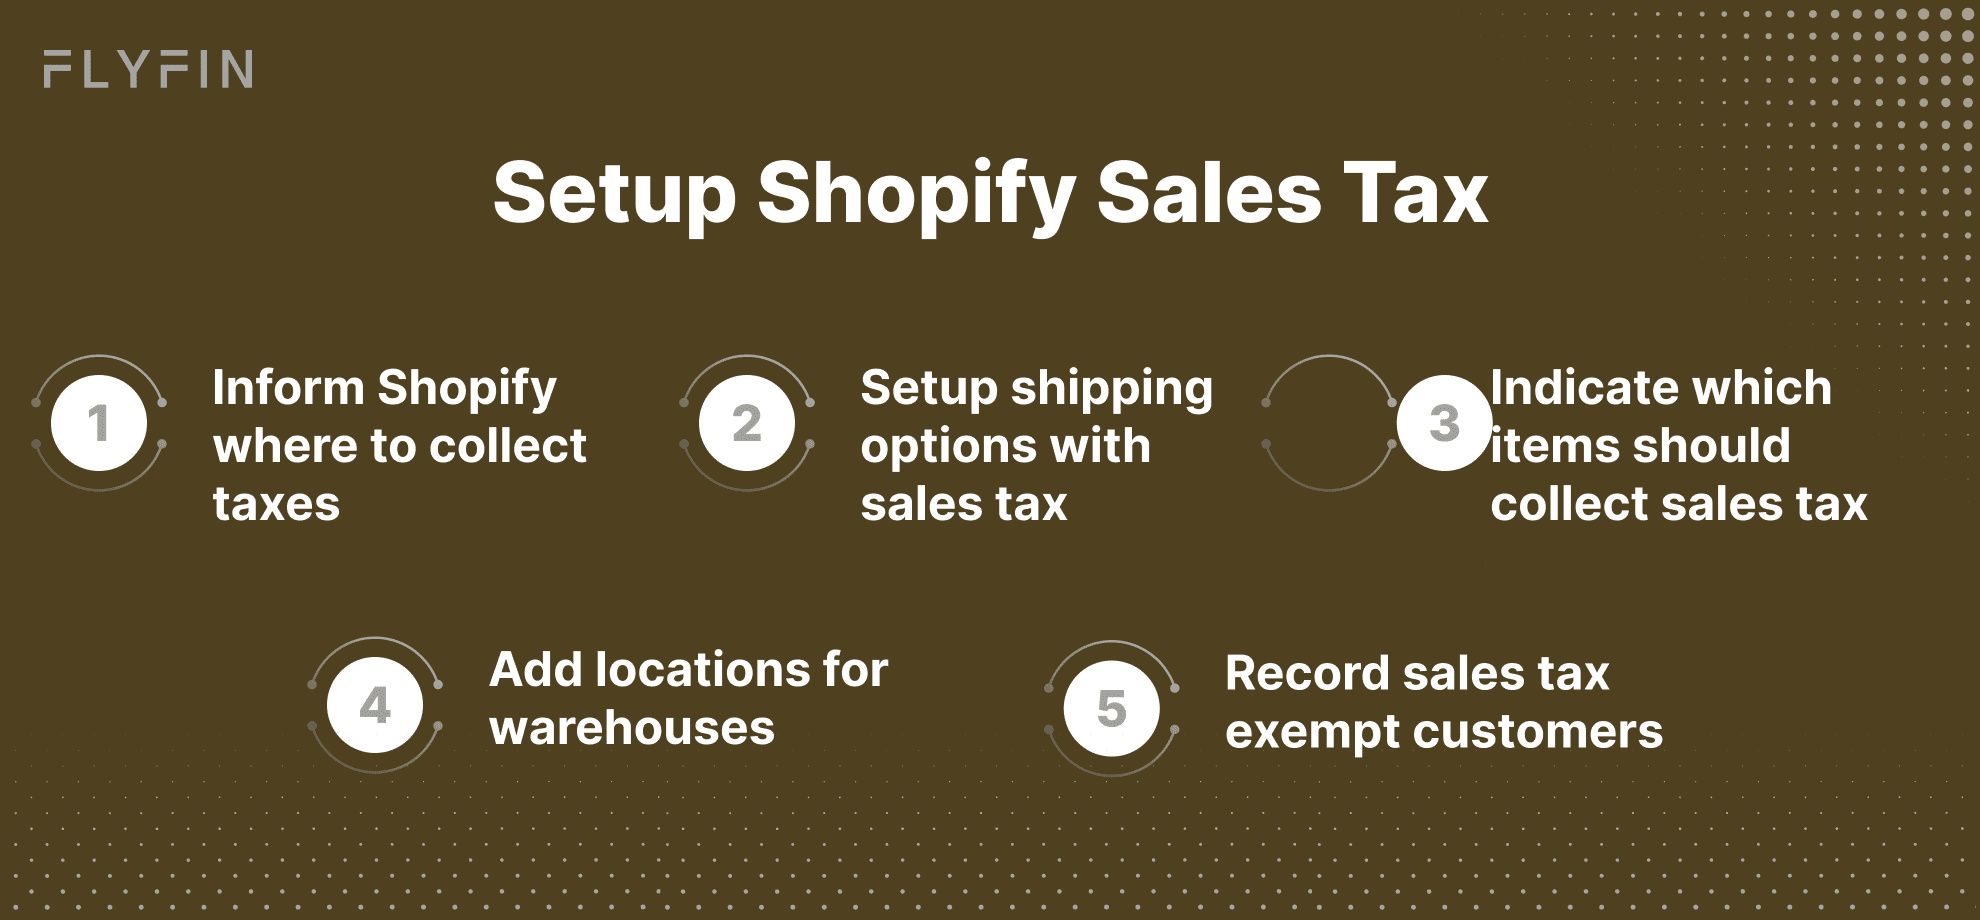 Image shows steps to set up sales tax on Shopify. Includes informing Shopify where to collect taxes, setting up shipping options with sales tax, adding warehouse locations, indicating taxable items, and recording tax-exempt customers.